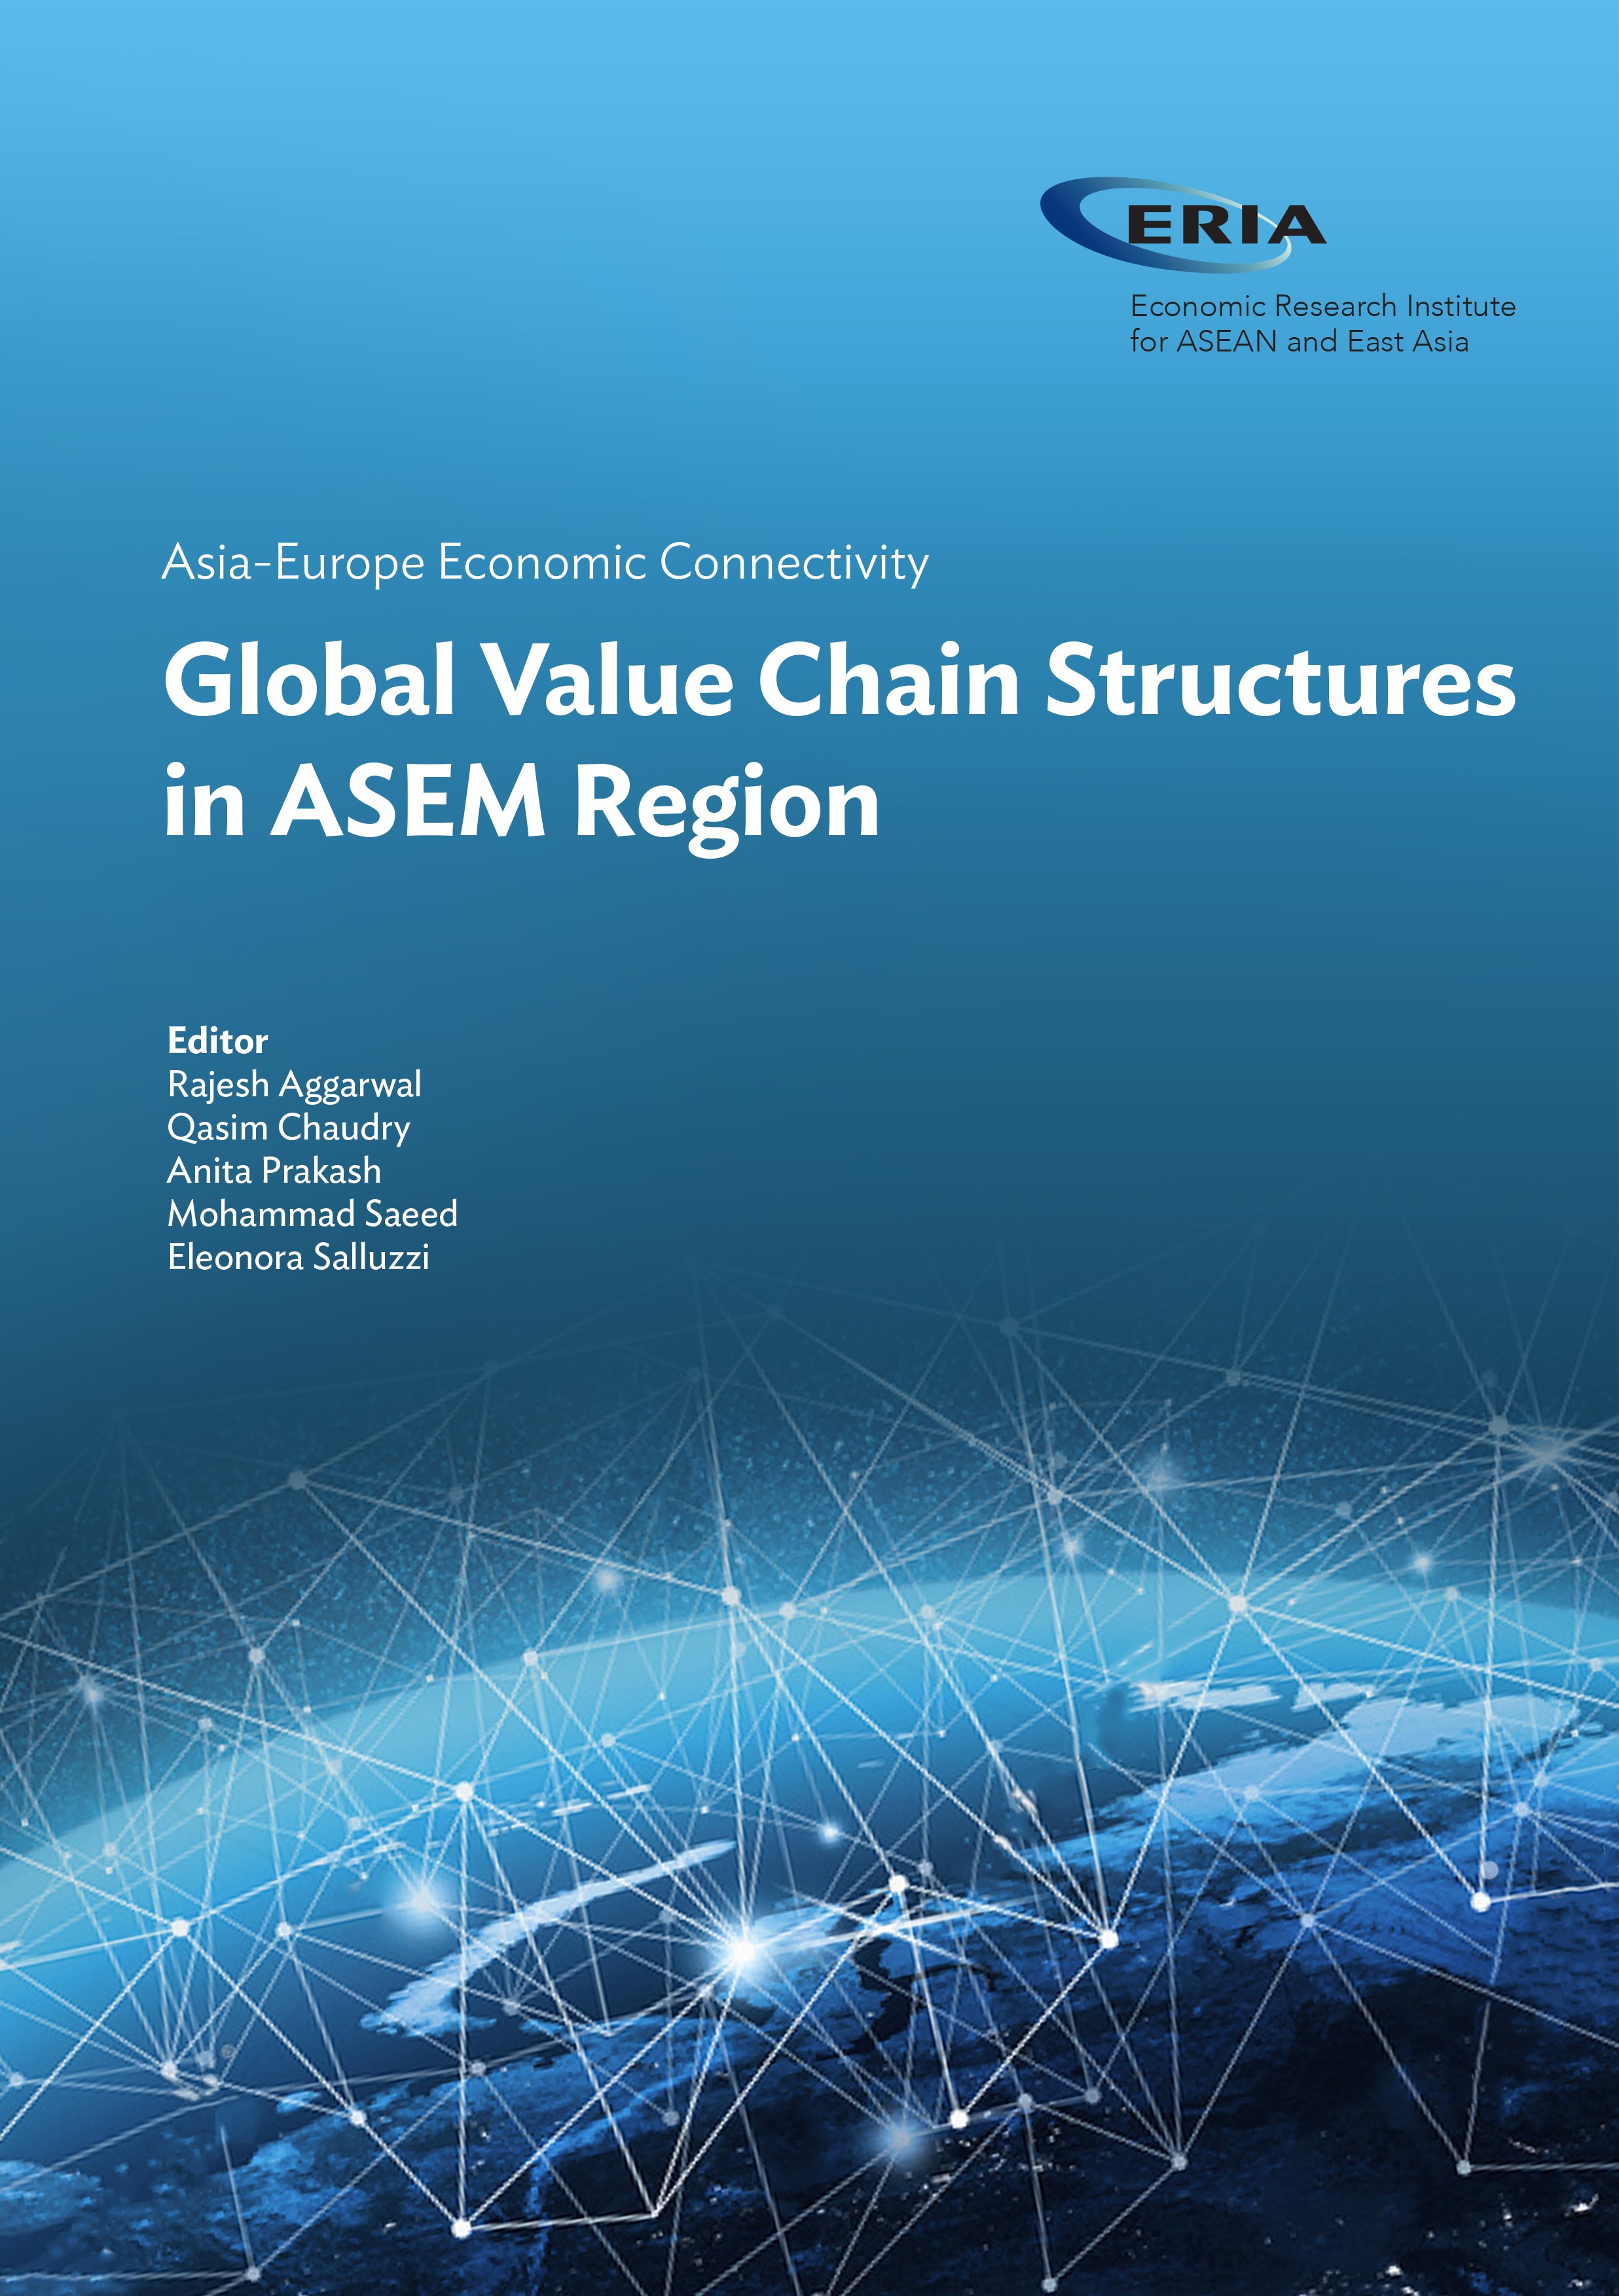 Asia-Europe Economic Connectivity: Global Value Chain Structures in ASEM Region